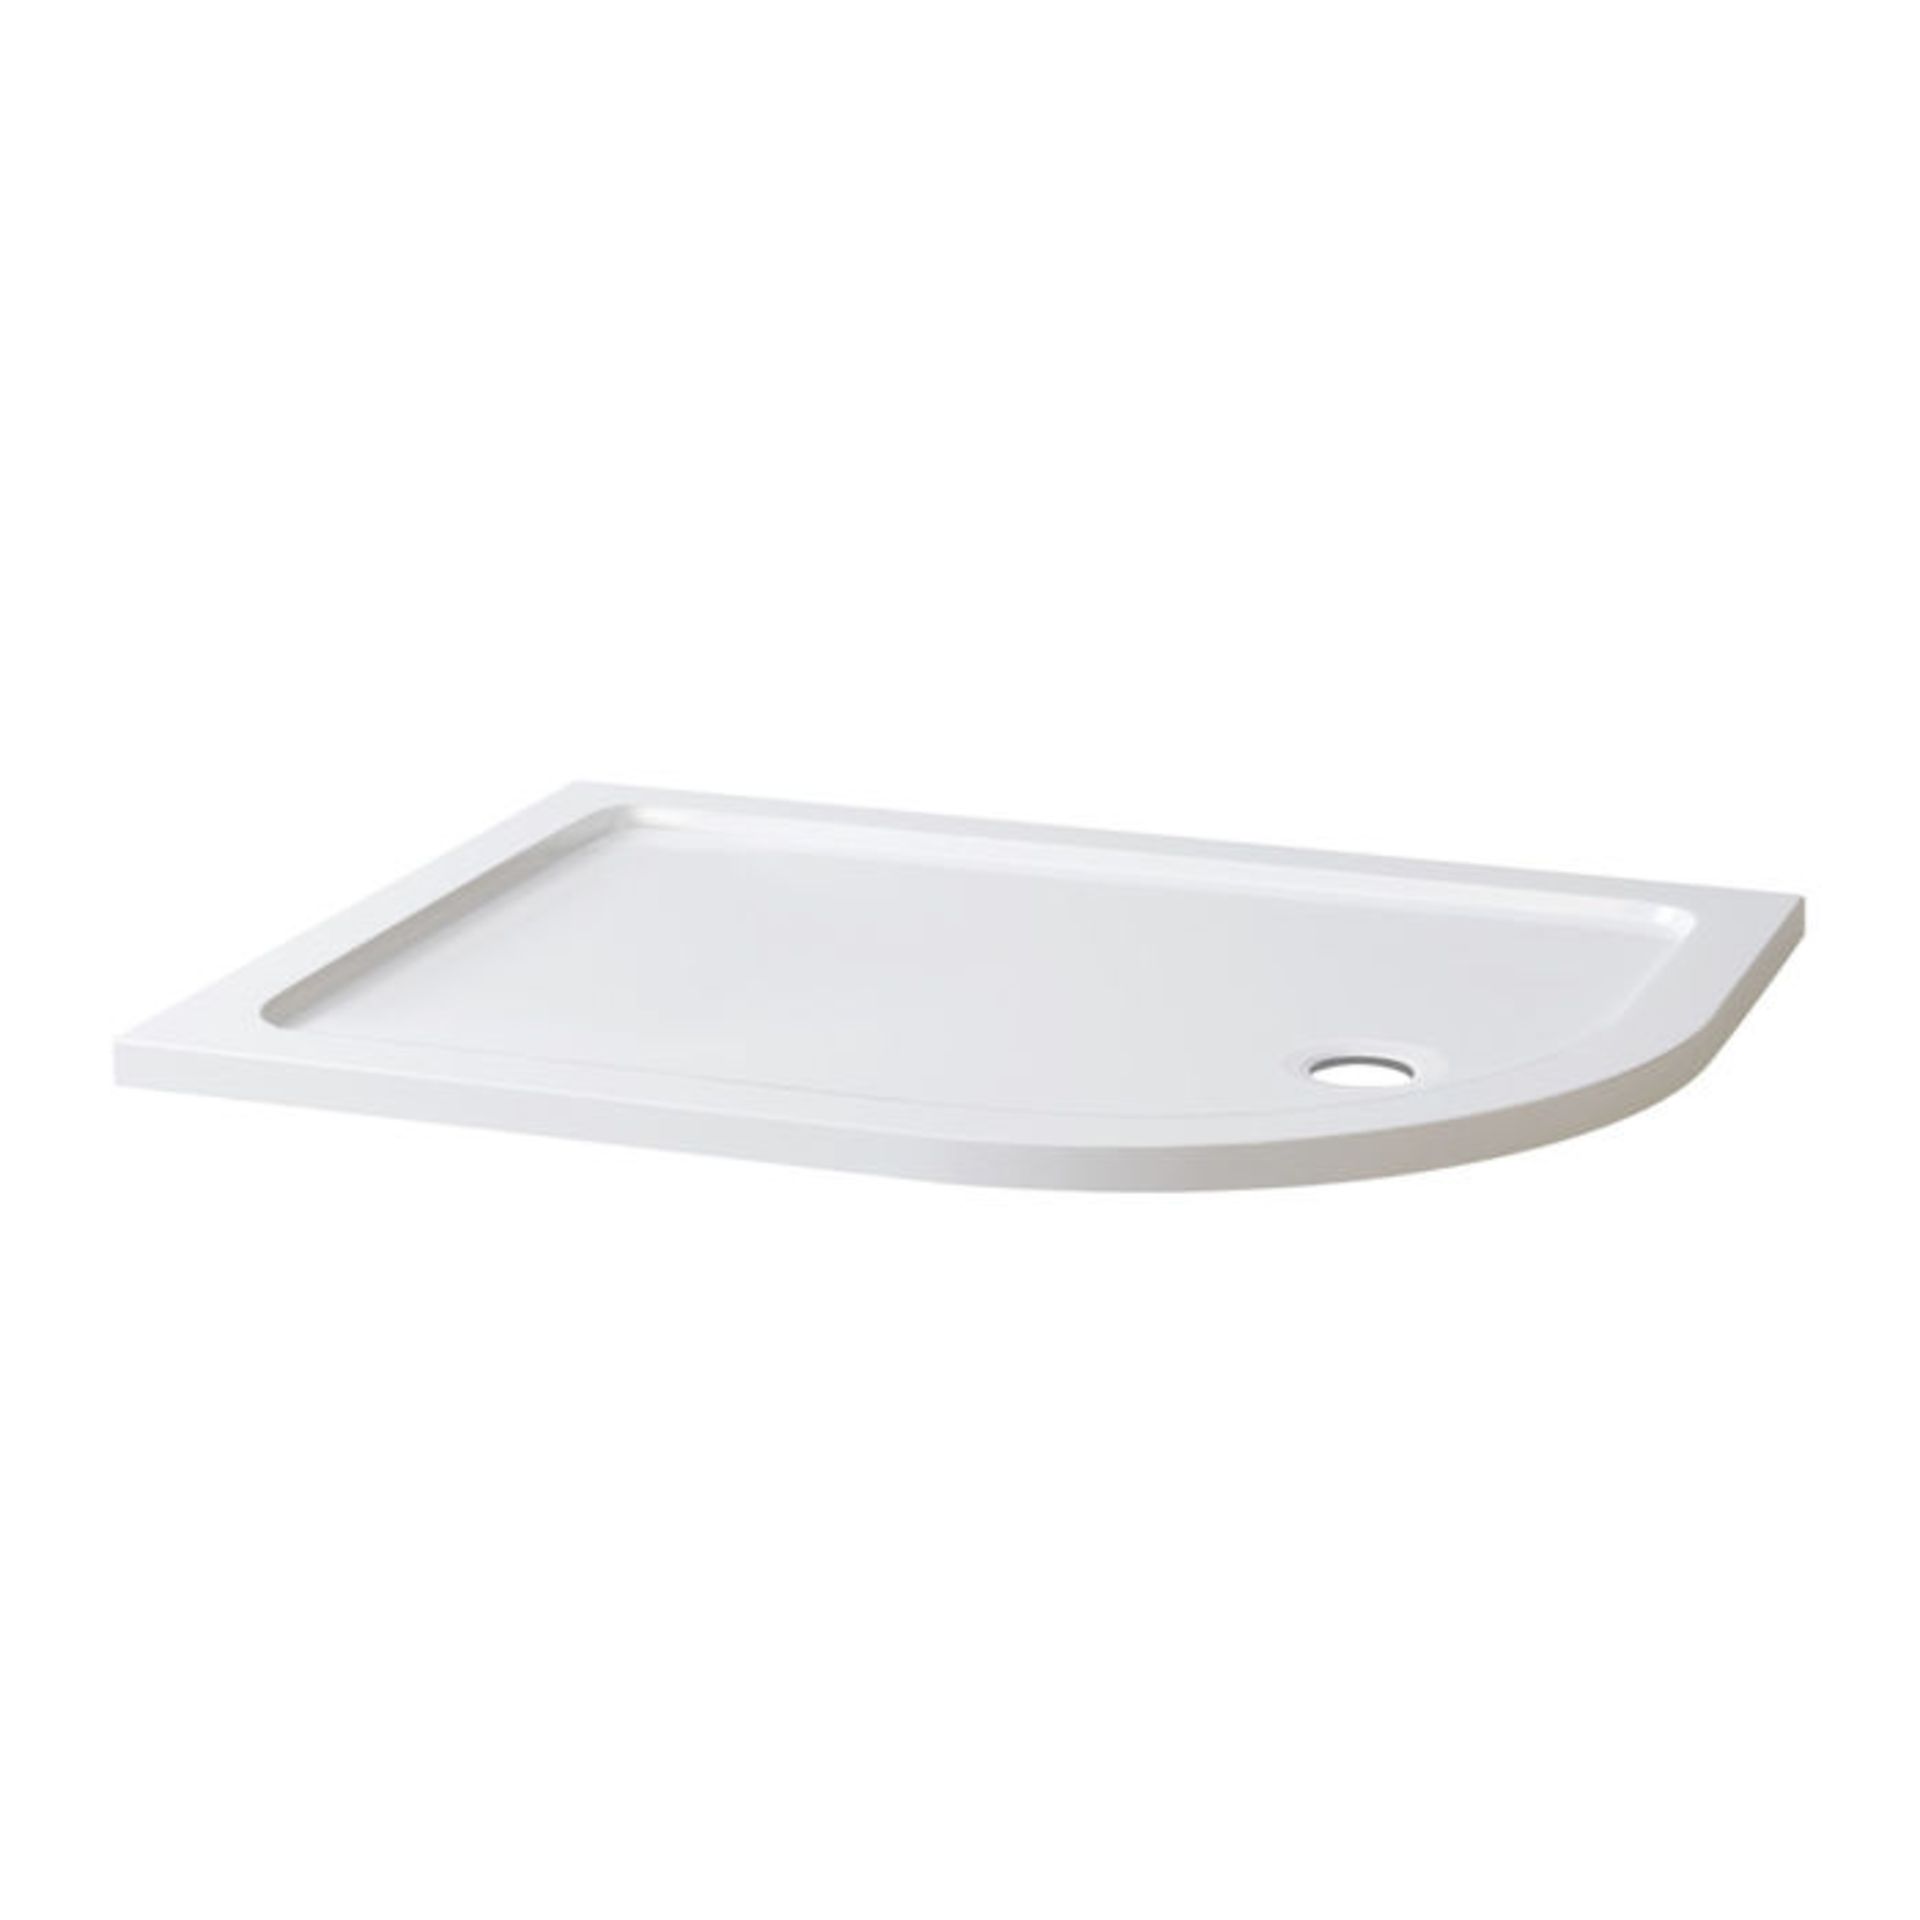 (AD91) 1200x900mm Offset Quadrant Ultra Slim Stone Shower Tray - Right. Low profile ultraDesign - Image 4 of 4